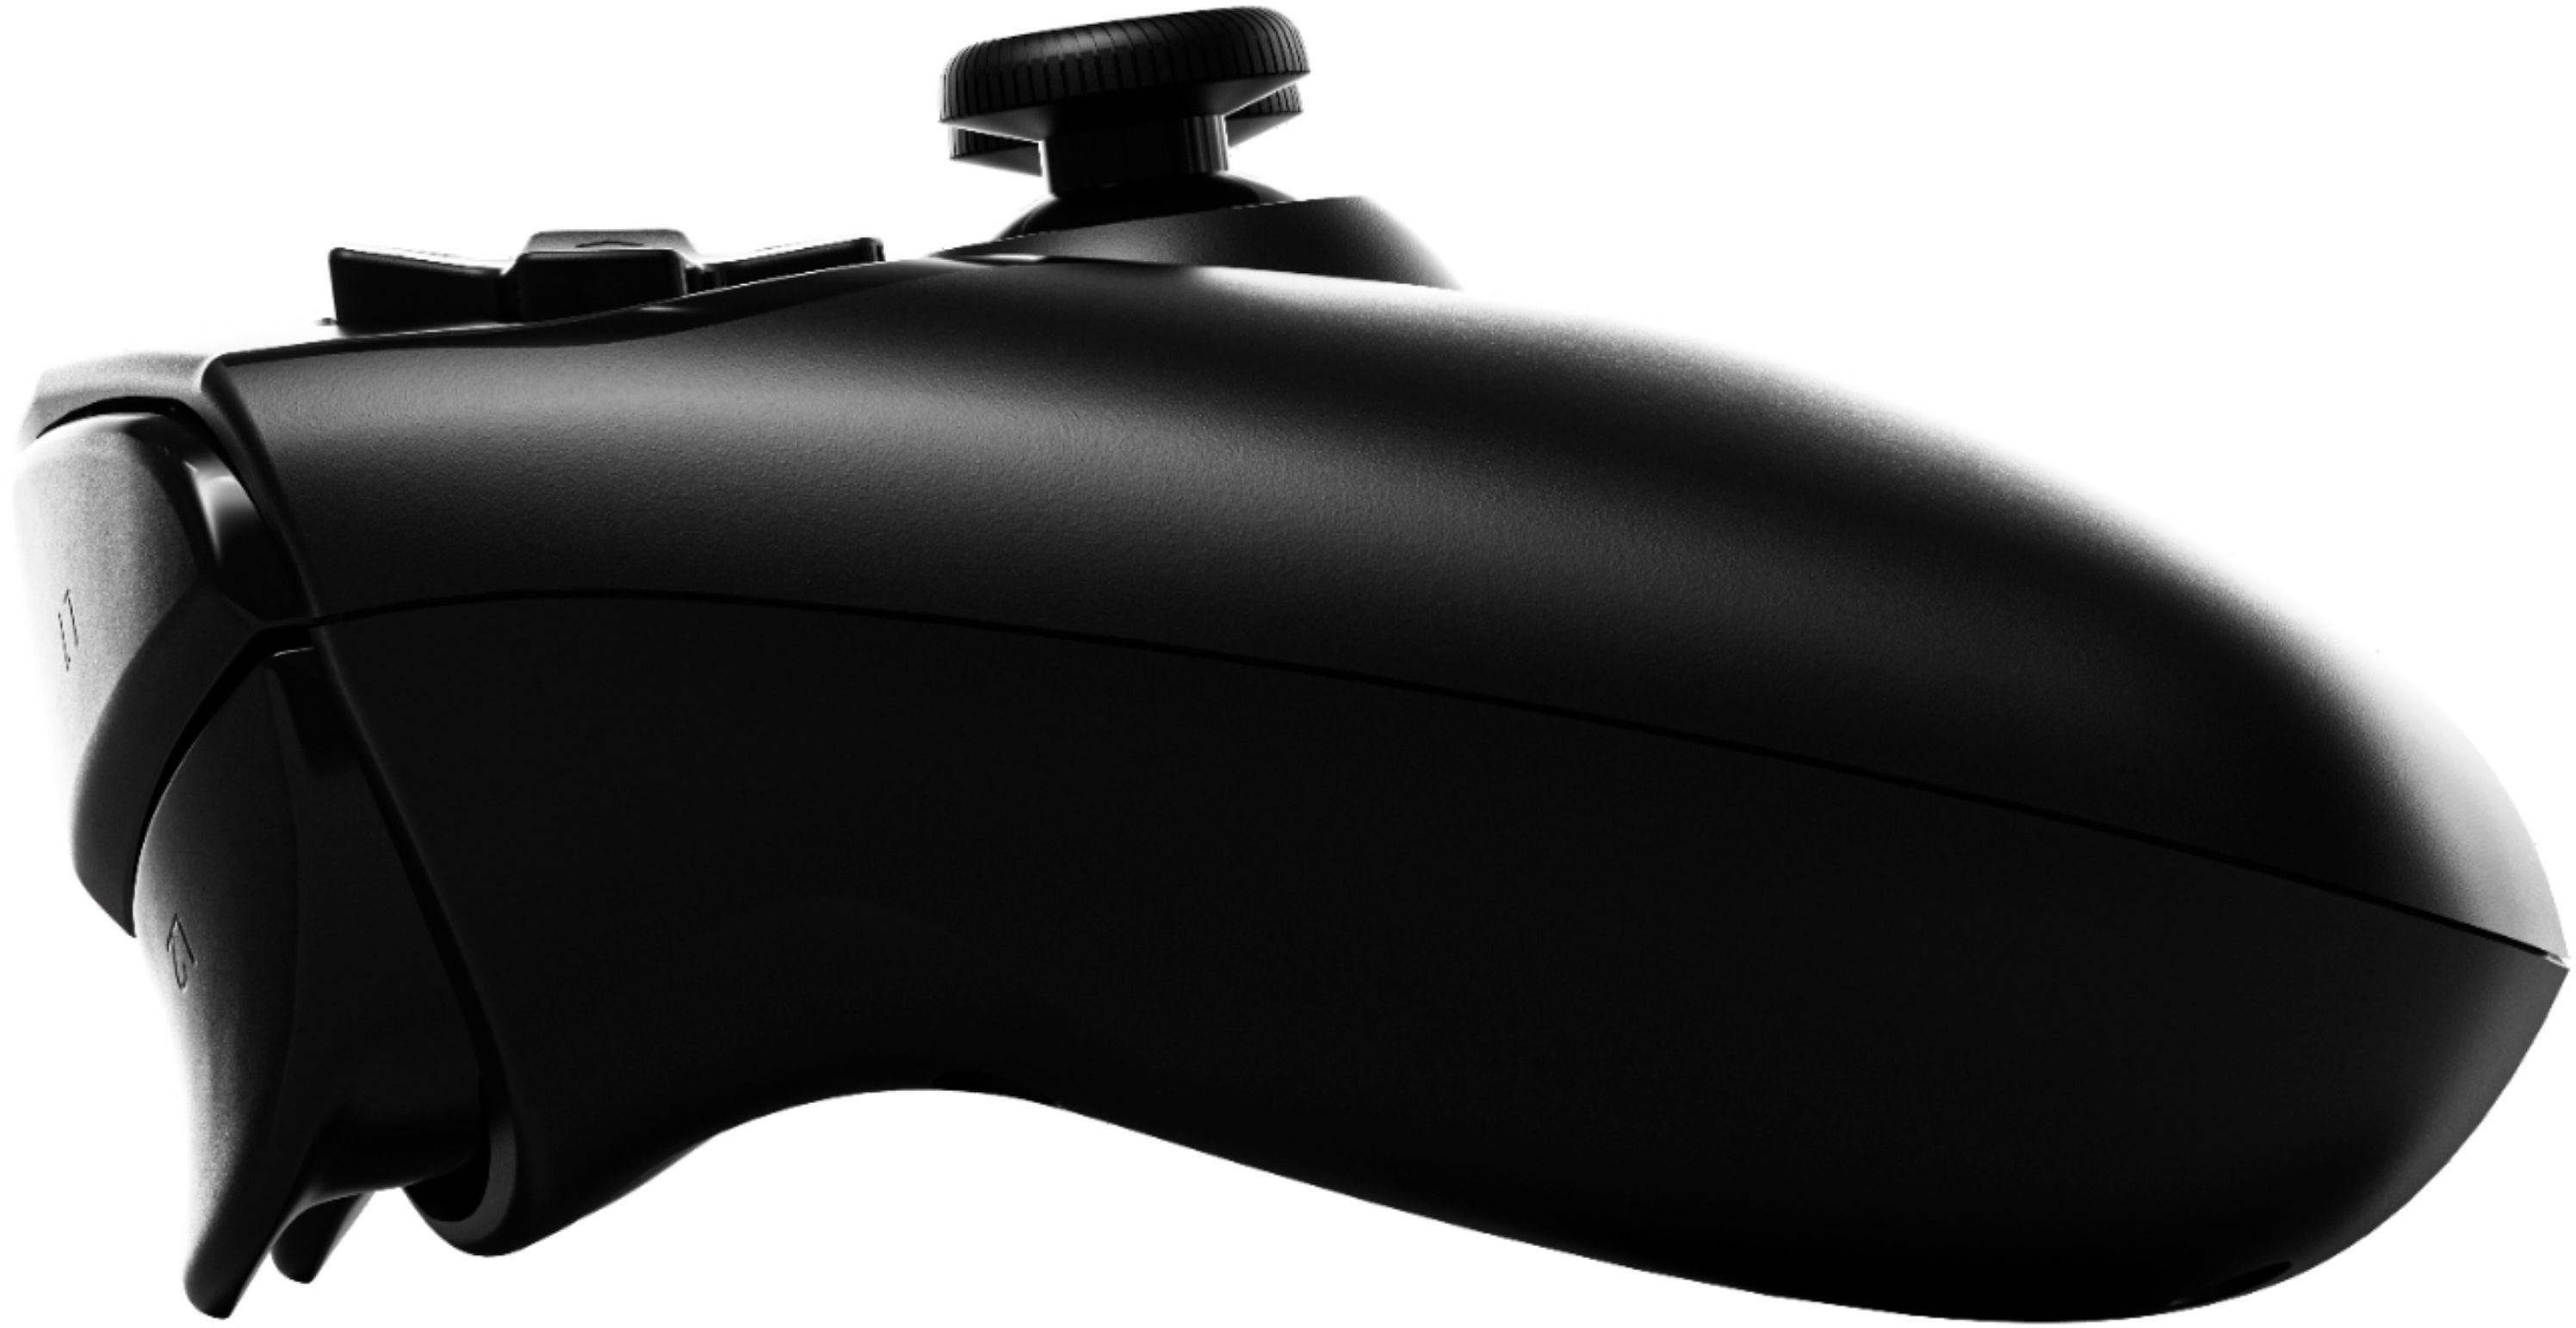 Left View: Rotor Riot - RR1852 Controller for Apple iOS7 or later devices - Black